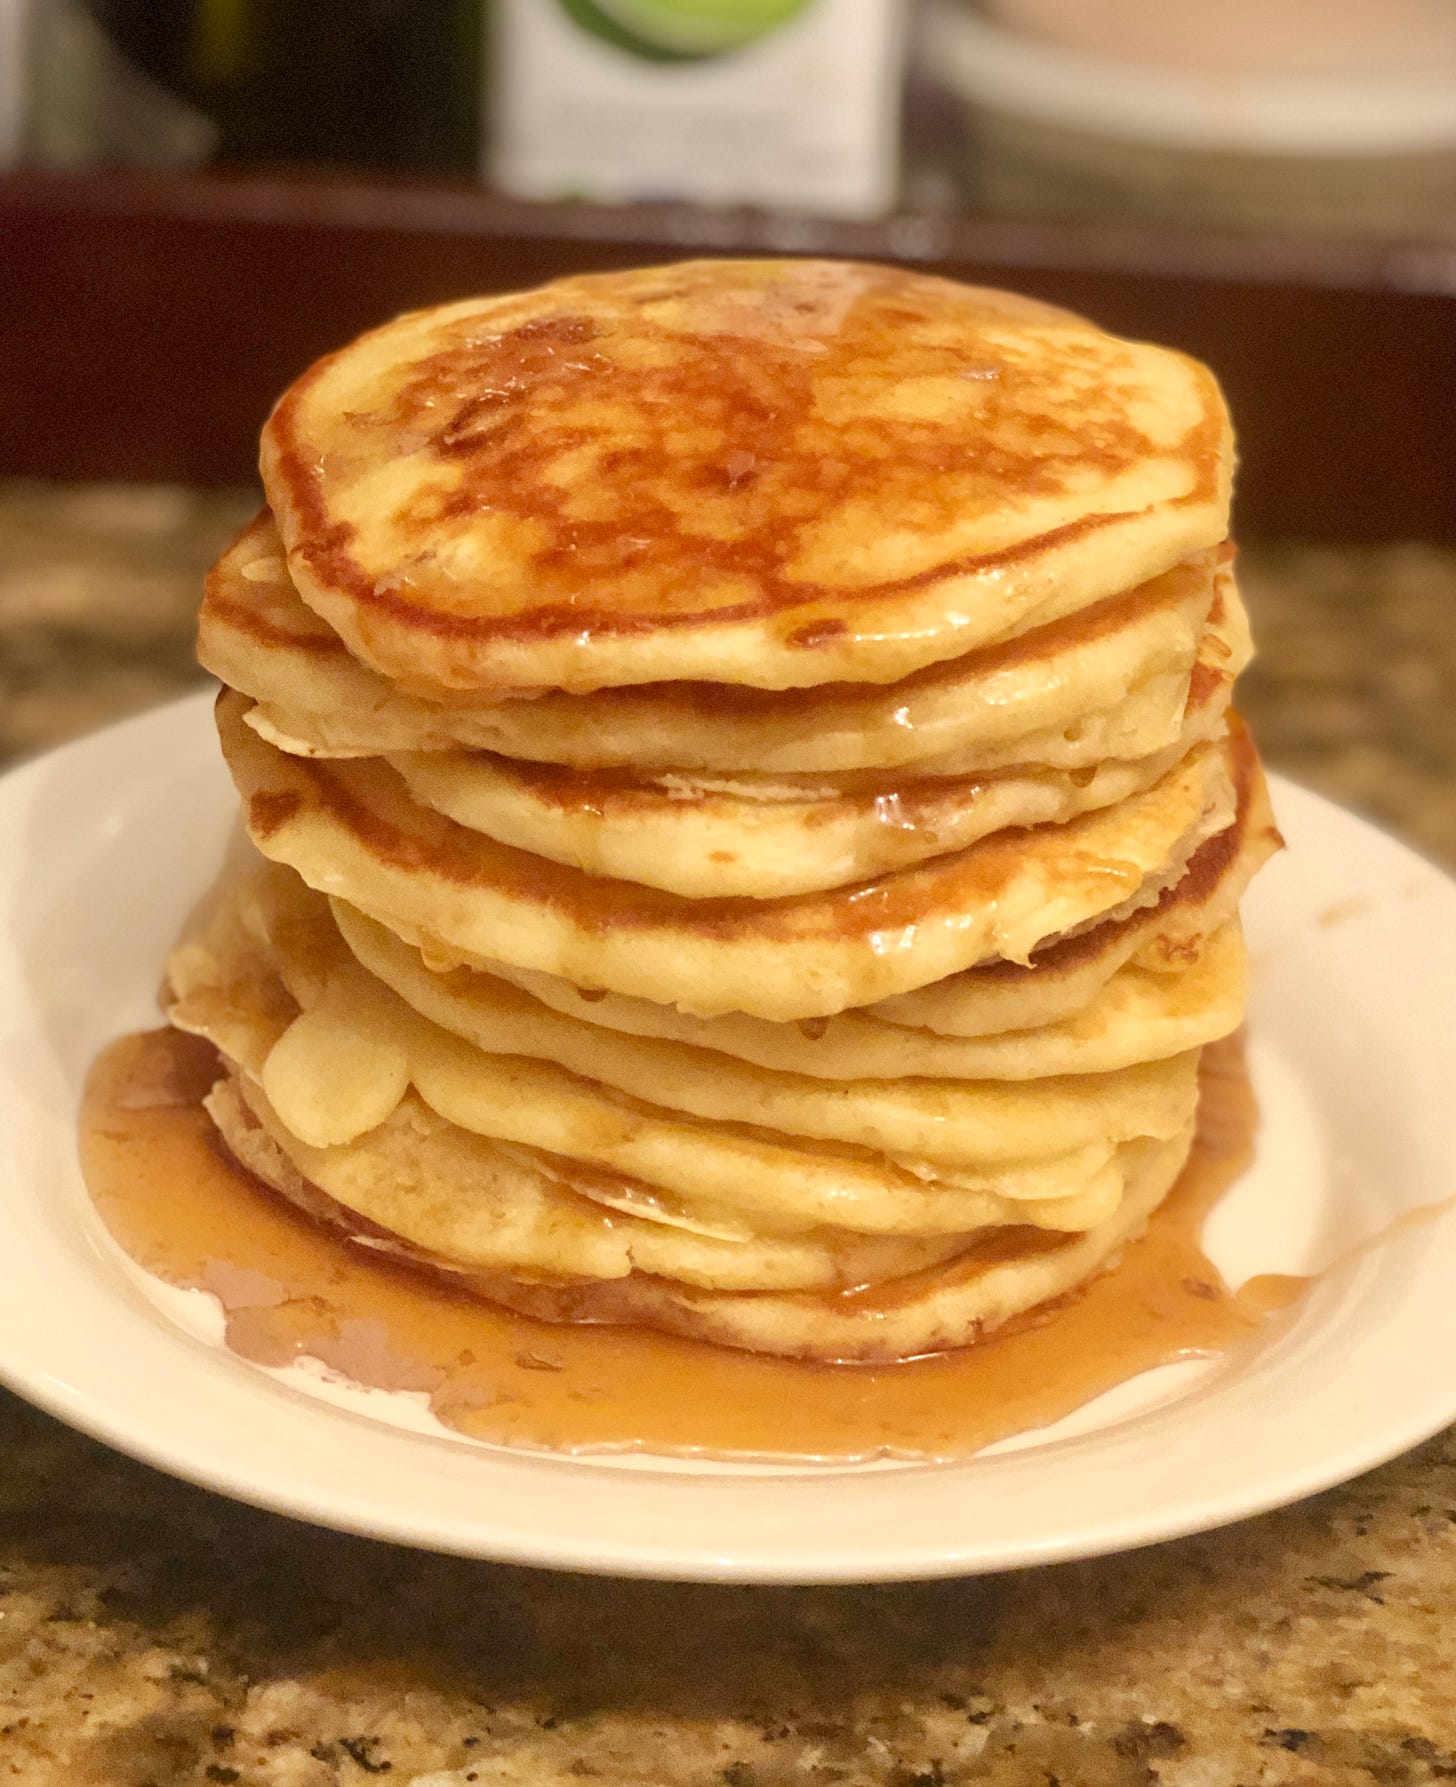 A stack of pancakes with syrup on a plate